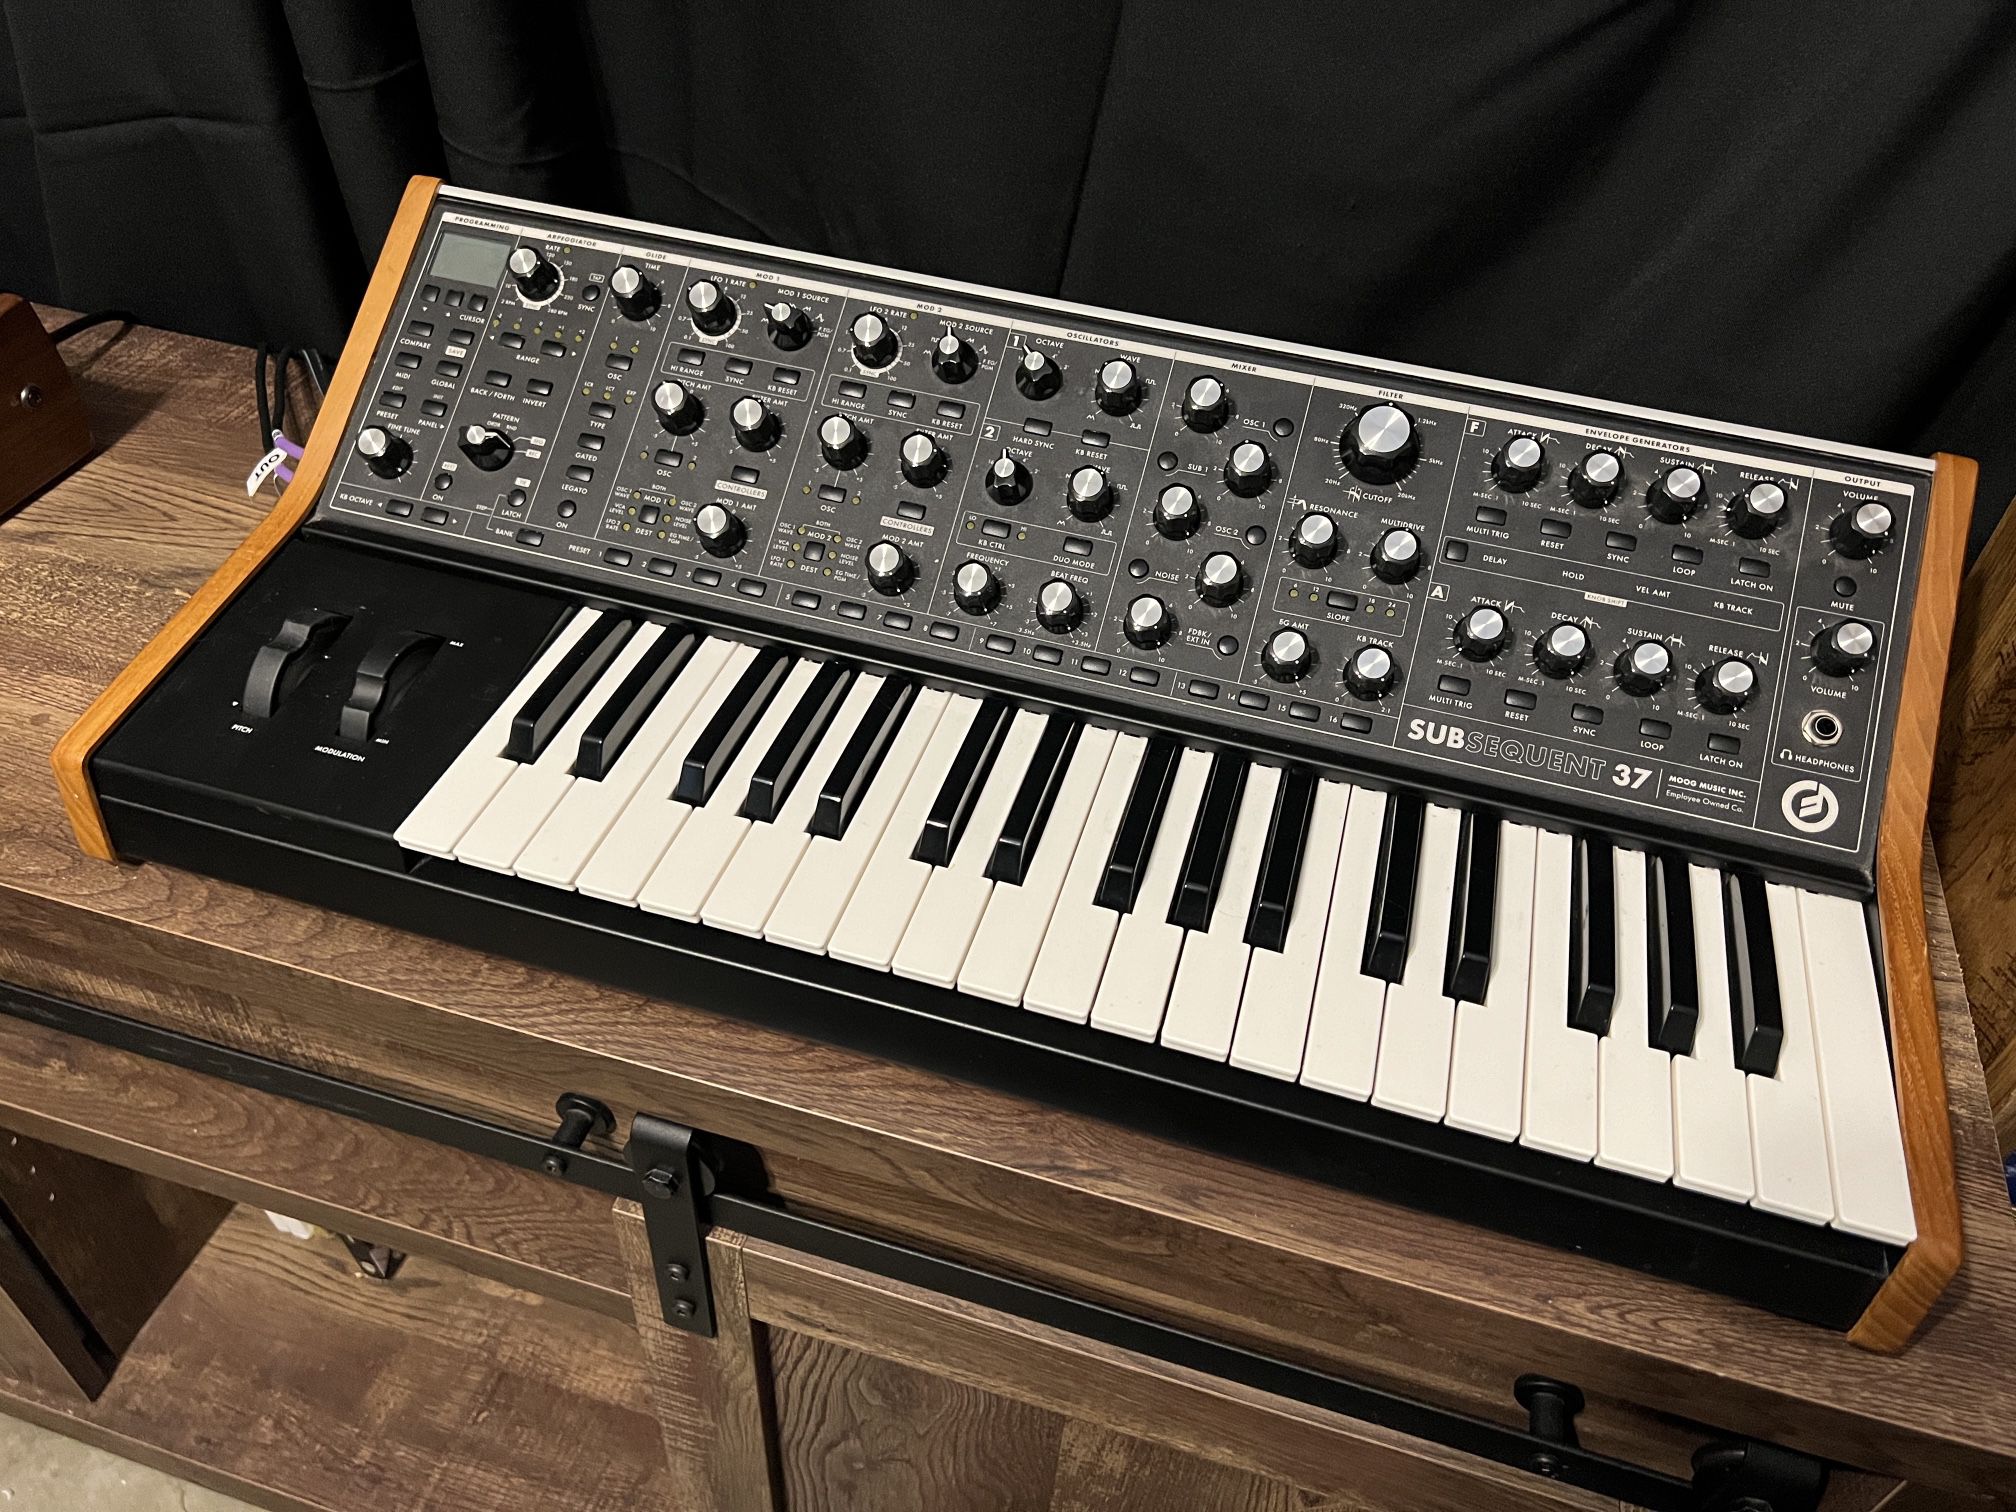 Moog Subsequent 37 Analog Synthesizer